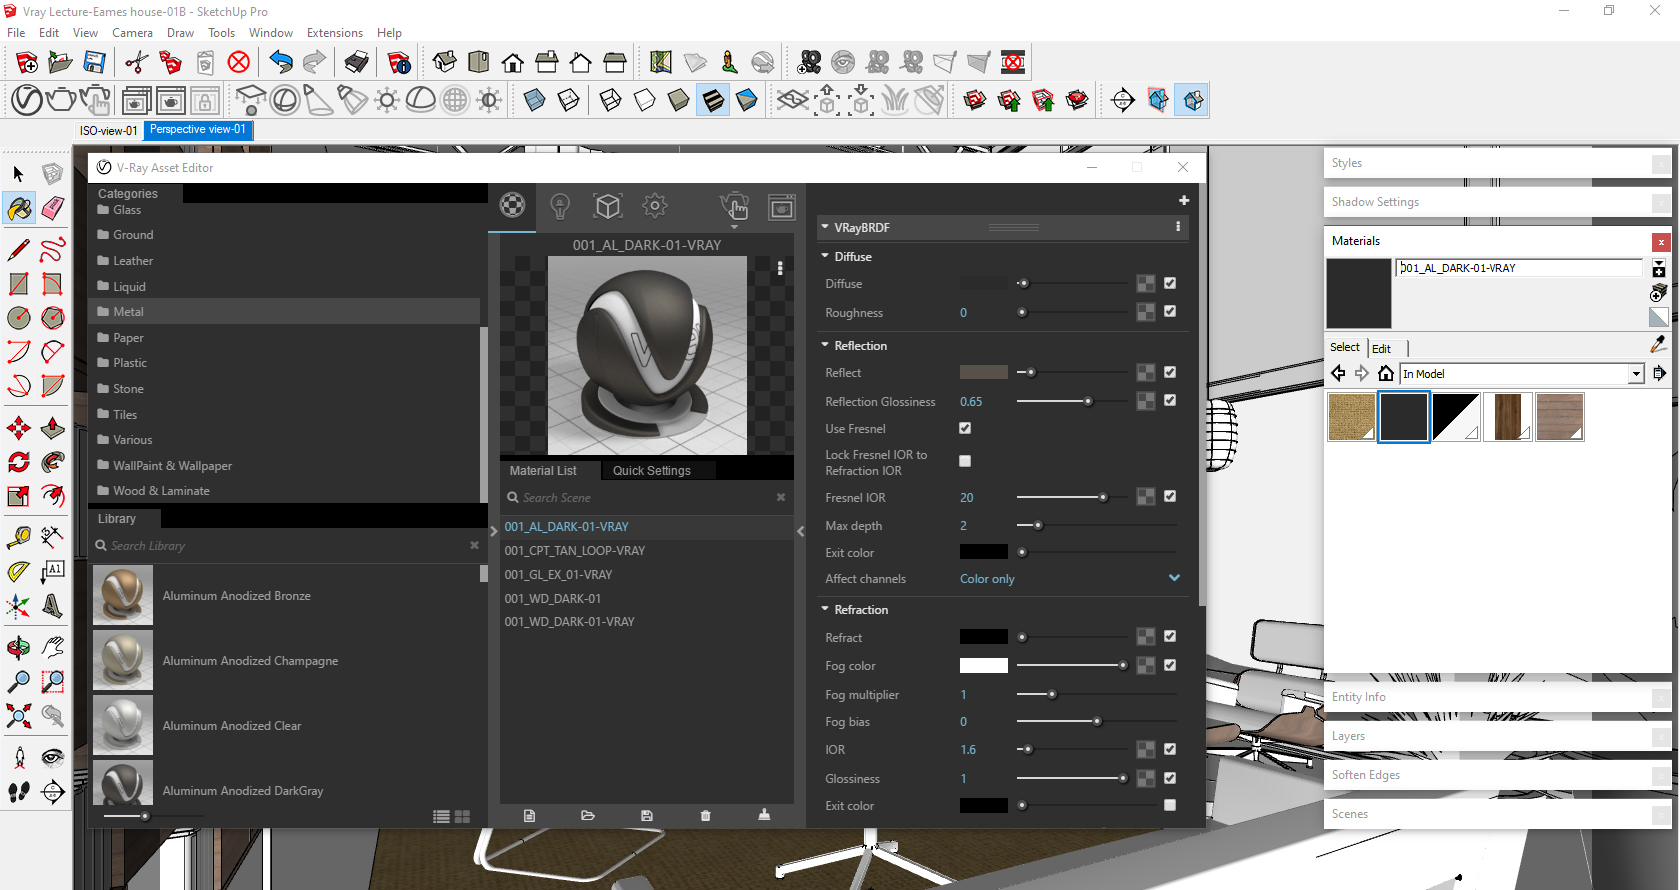 It indicates how to edit a V-Ray material based on a SketchUp material.